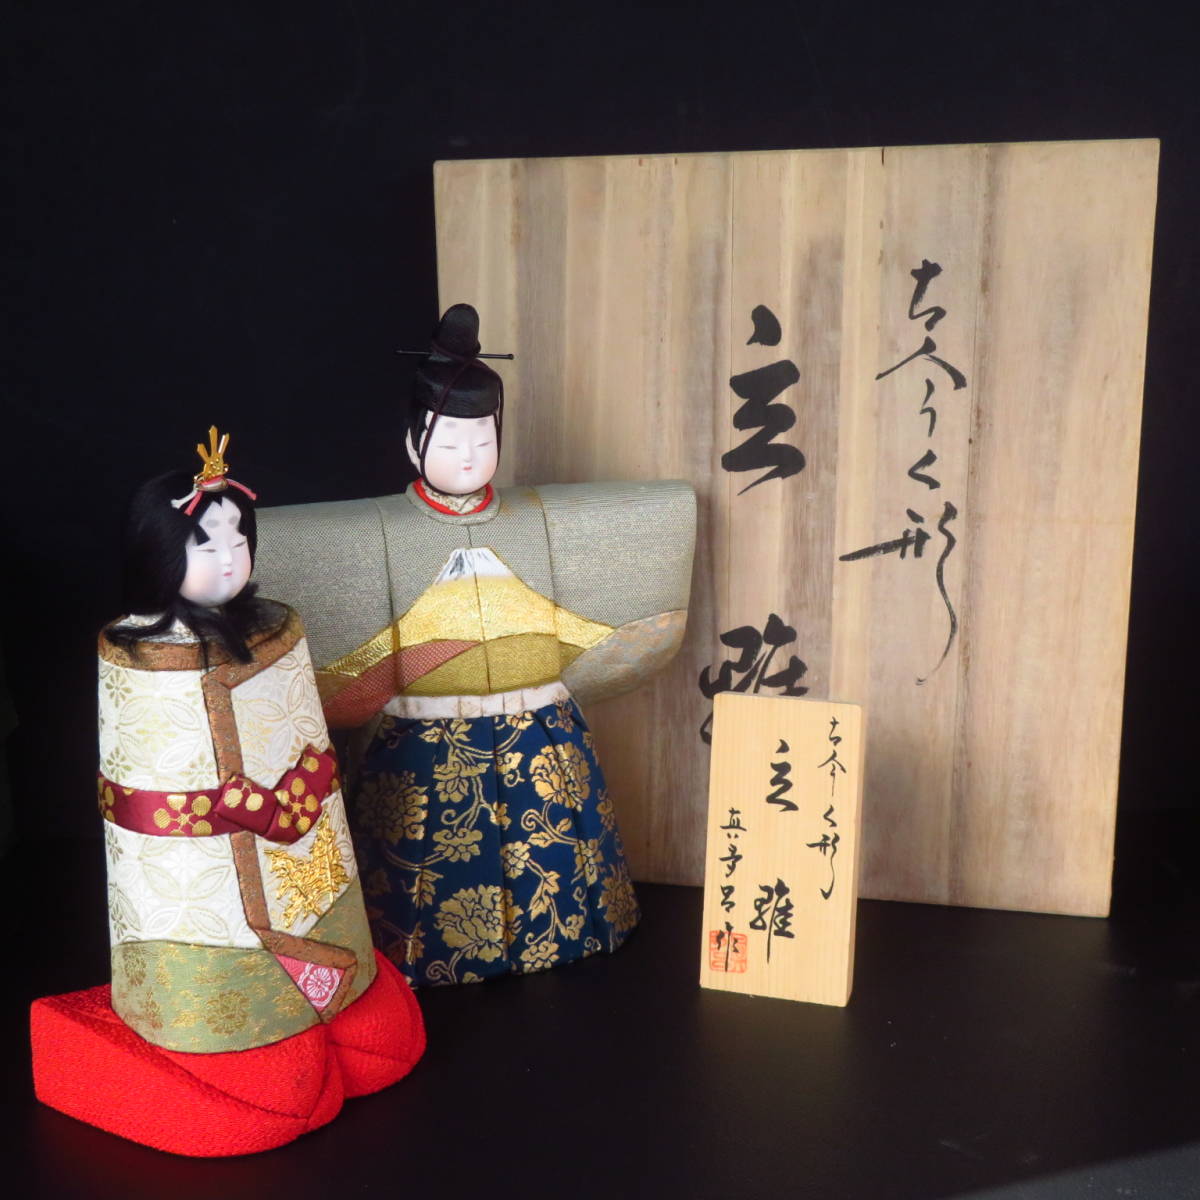 Made by Mataro, Kokin dolls, standing dolls, wooden dolls, Hina dolls, Japanese dolls, Mataro dolls, Emperor and Empress dolls, artist inscribed, box included, season, Annual Events, Doll's Festival, Hina Dolls